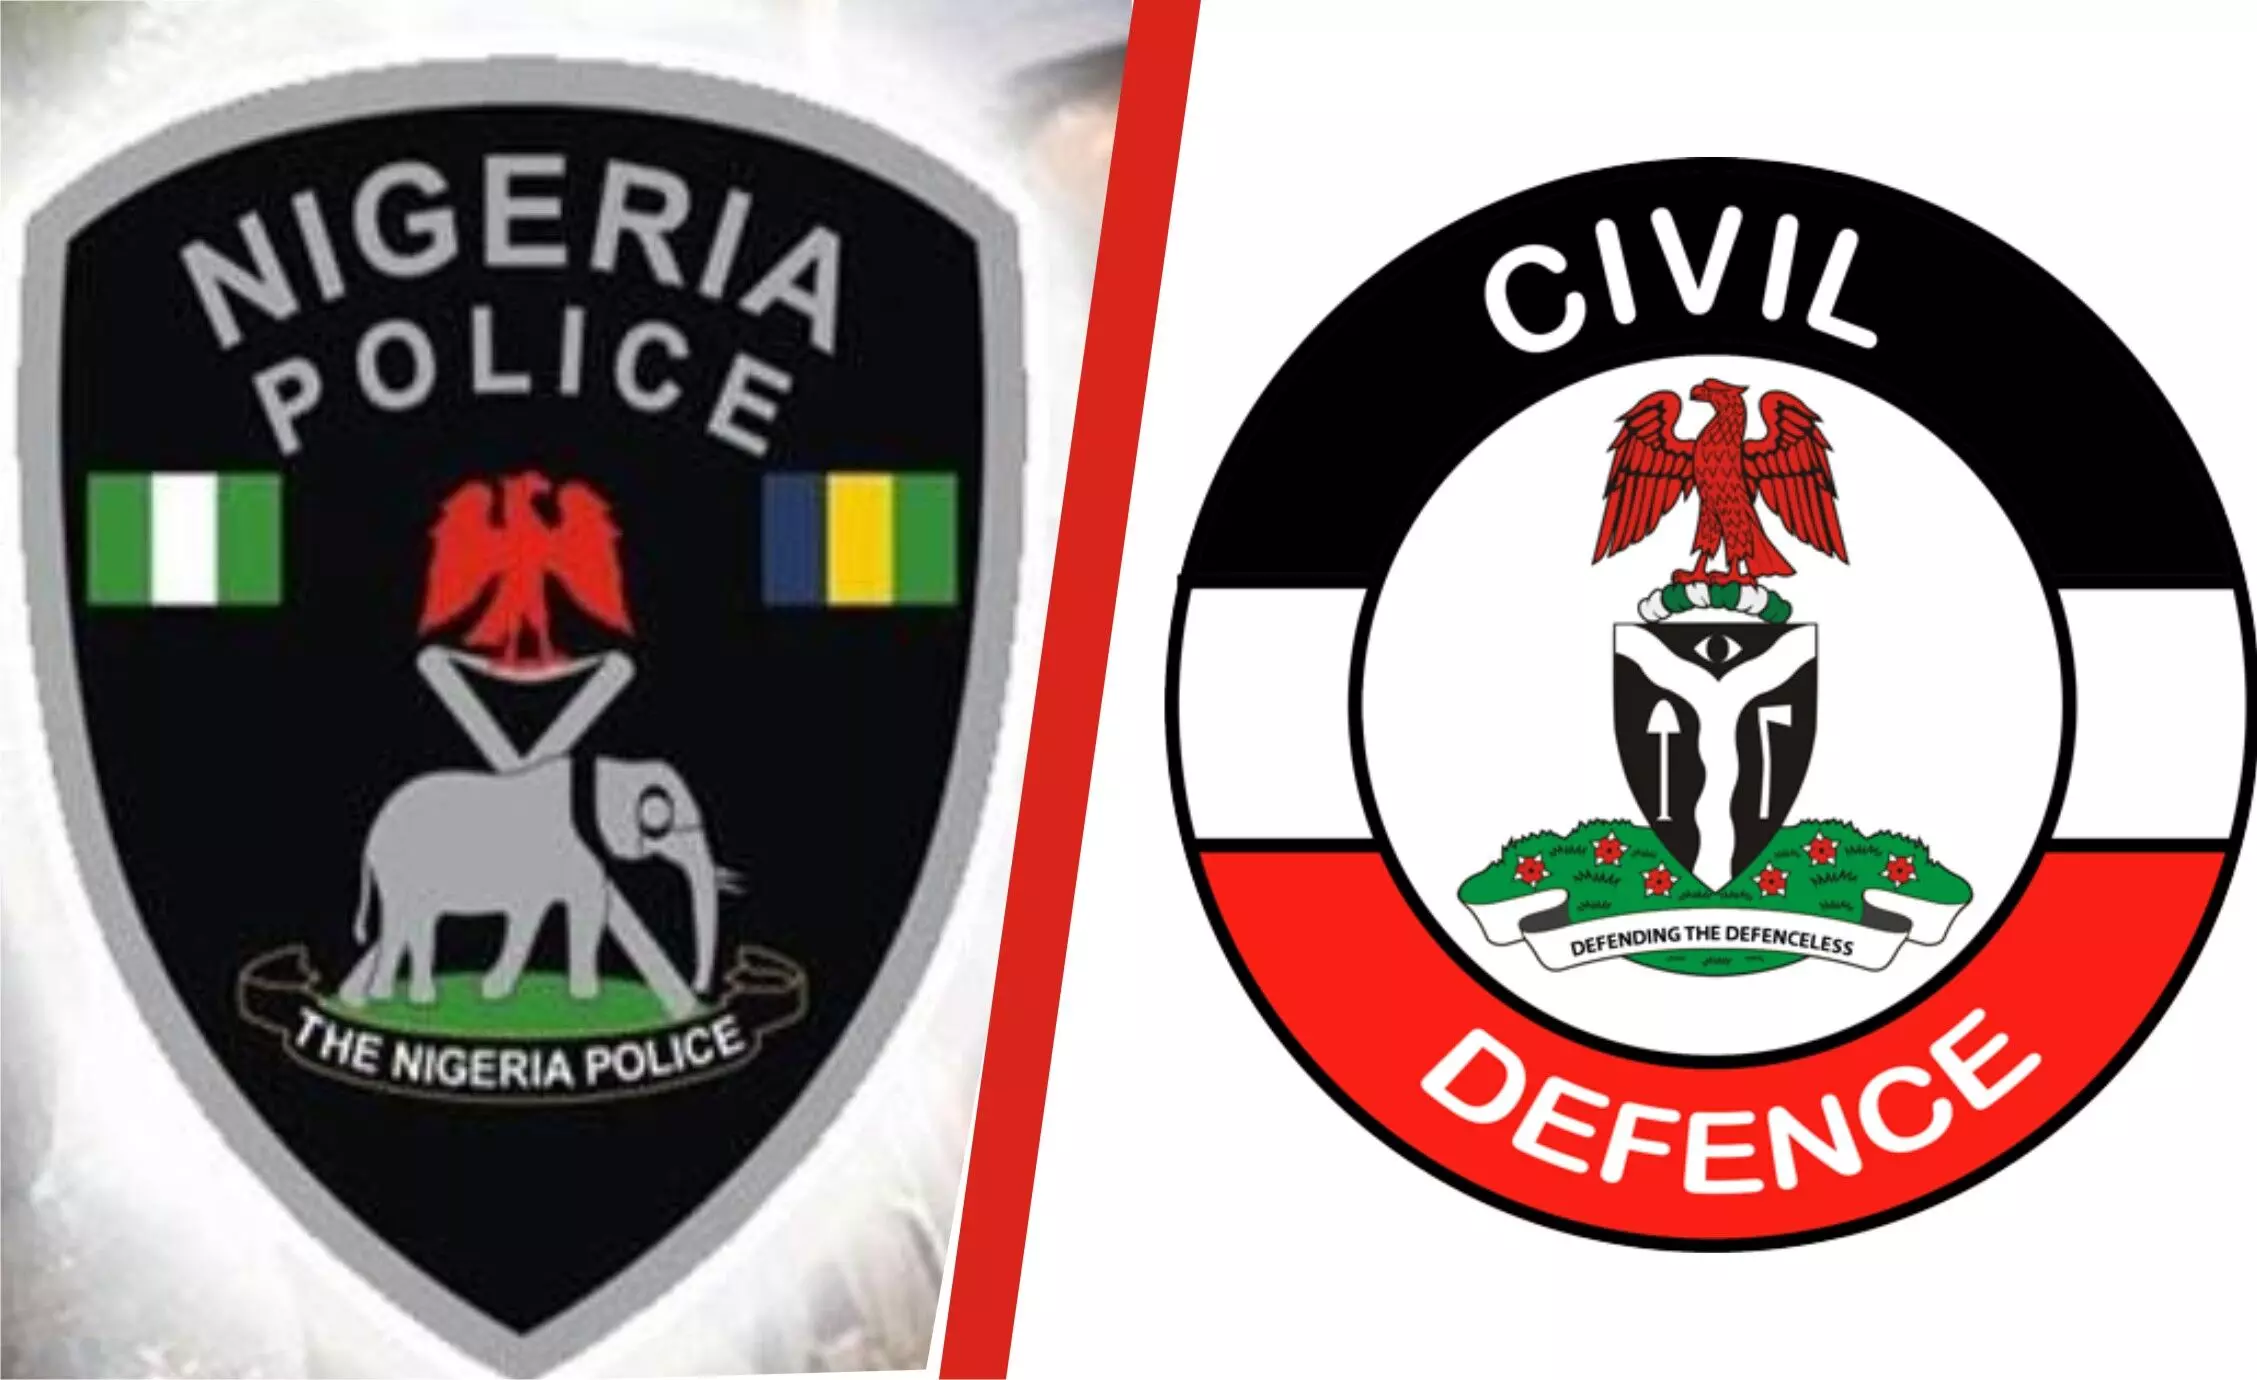 Police beat NSCDC to win Anambra Security Challenge Cup